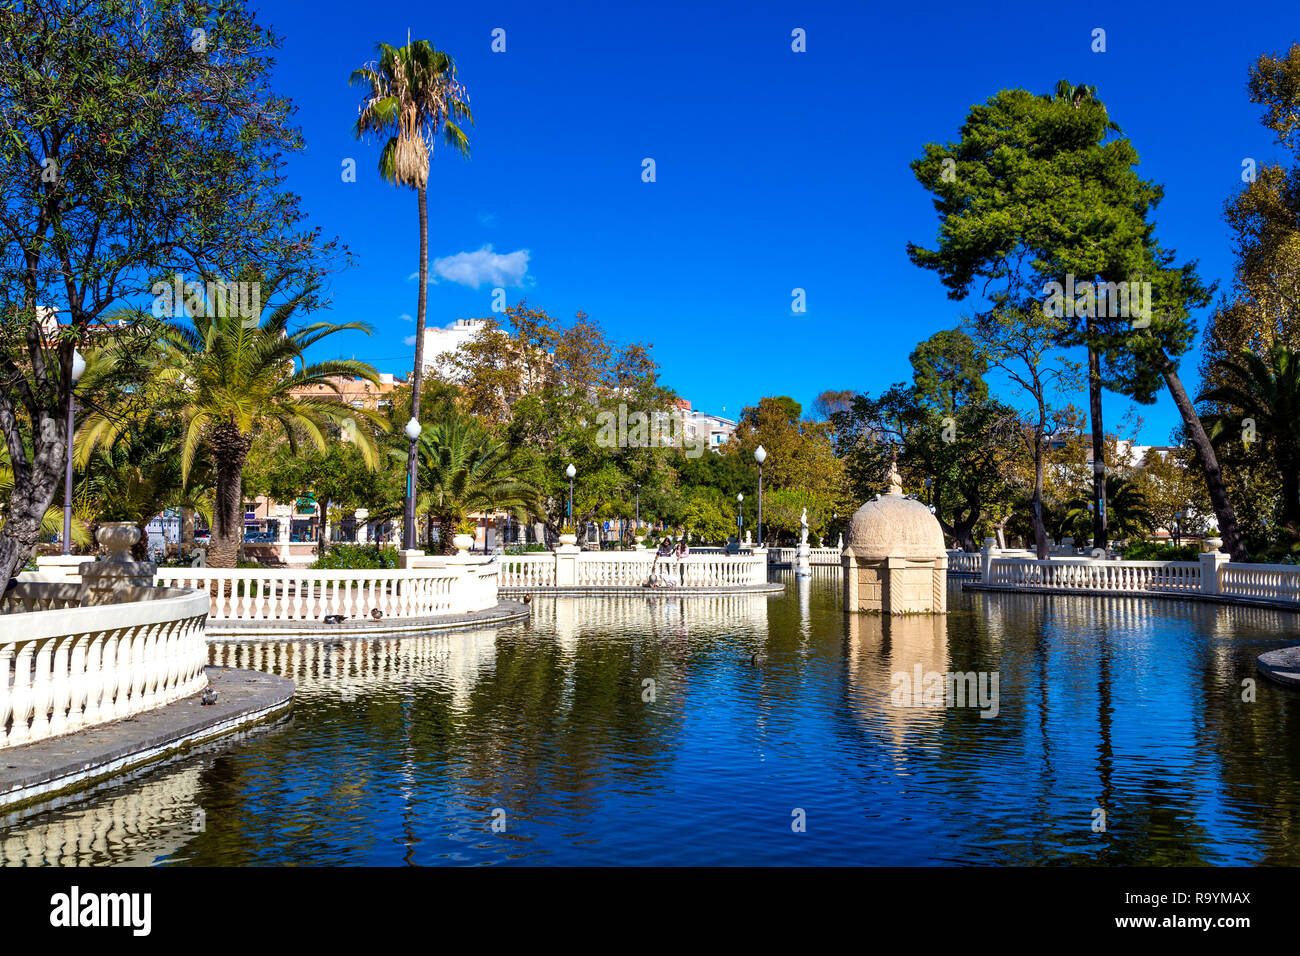 Pond surrounded by exotic palm trees at Ribalta Park in Castellon de la Plana, Spain Stock Photo